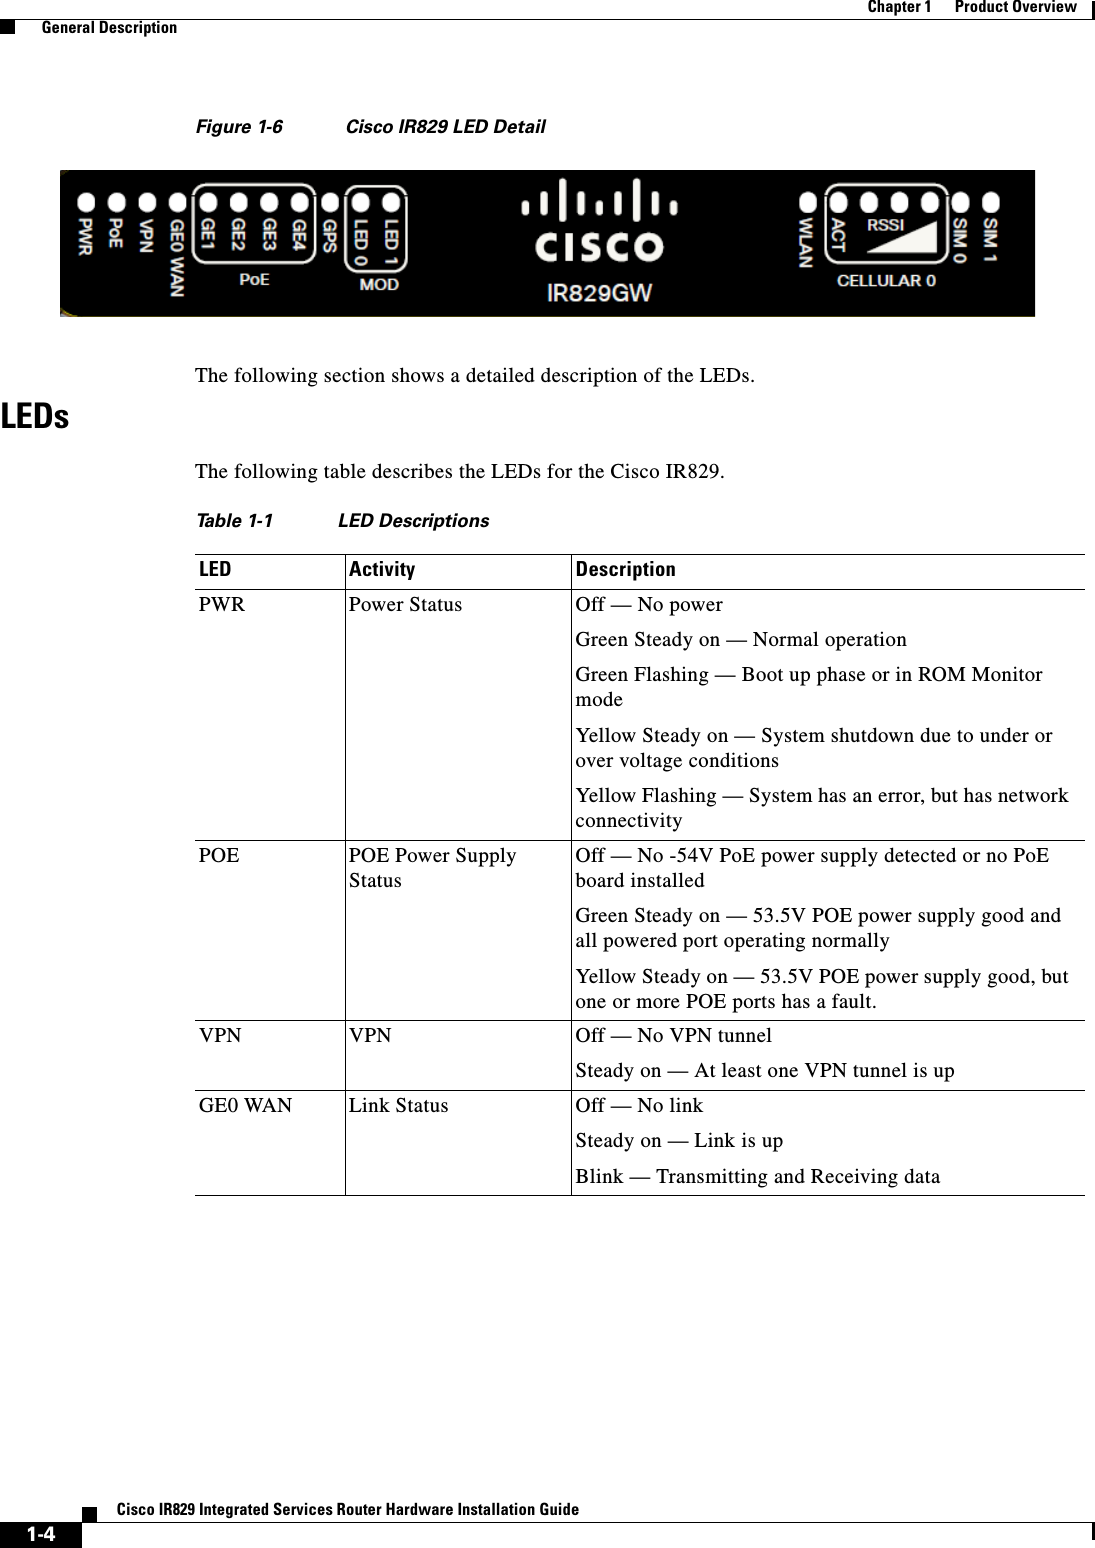 1-4Cisco IR829 Integrated Services Router Hardware Installation GuideChapter 1      Product Overview   General DescriptionFigure 1-6 Cisco IR829 LED DetailThe following section shows a detailed description of the LEDs.LEDsThe following table describes the LEDs for the Cisco IR829.Ta b l e  1-1 LED Descriptions  LED Activity DescriptionPWR Power Status Off — No powerGreen Steady on — Normal operationGreen Flashing — Boot up phase or in ROM Monitor modeYellow Steady on — System shutdown due to under or over voltage conditionsYellow Flashing — System has an error, but has network connectivityPOE POE Power Supply StatusOff — No -54V PoE power supply detected or no PoE board installedGreen Steady on — 53.5V POE power supply good and all powered port operating normallyYellow Steady on — 53.5V POE power supply good, but one or more POE ports has a fault.VPN VPN Off — No VPN tunnelSteady on — At least one VPN tunnel is upGE0 WAN Link Status Off — No linkSteady on — Link is upBlink — Transmitting and Receiving data